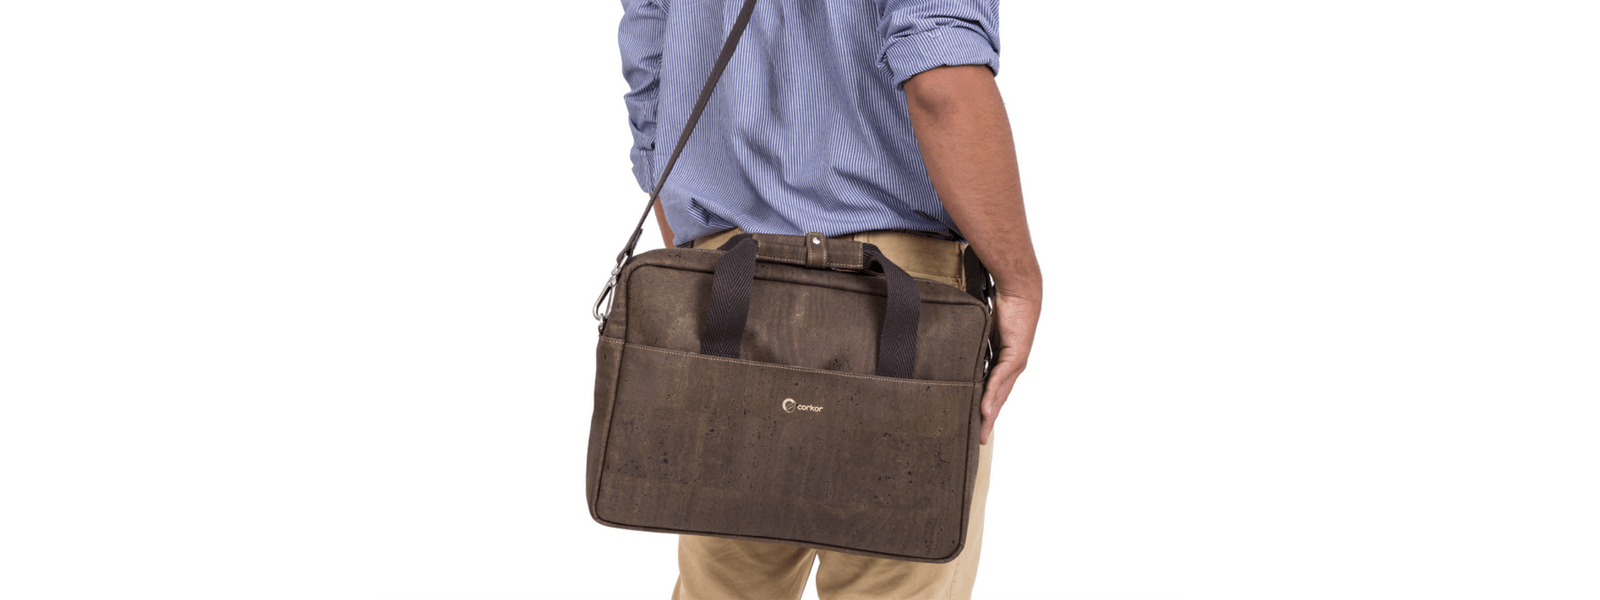 Briefcases and Messenger Bags: The Perfect Staple Pieces for Men | Corkor